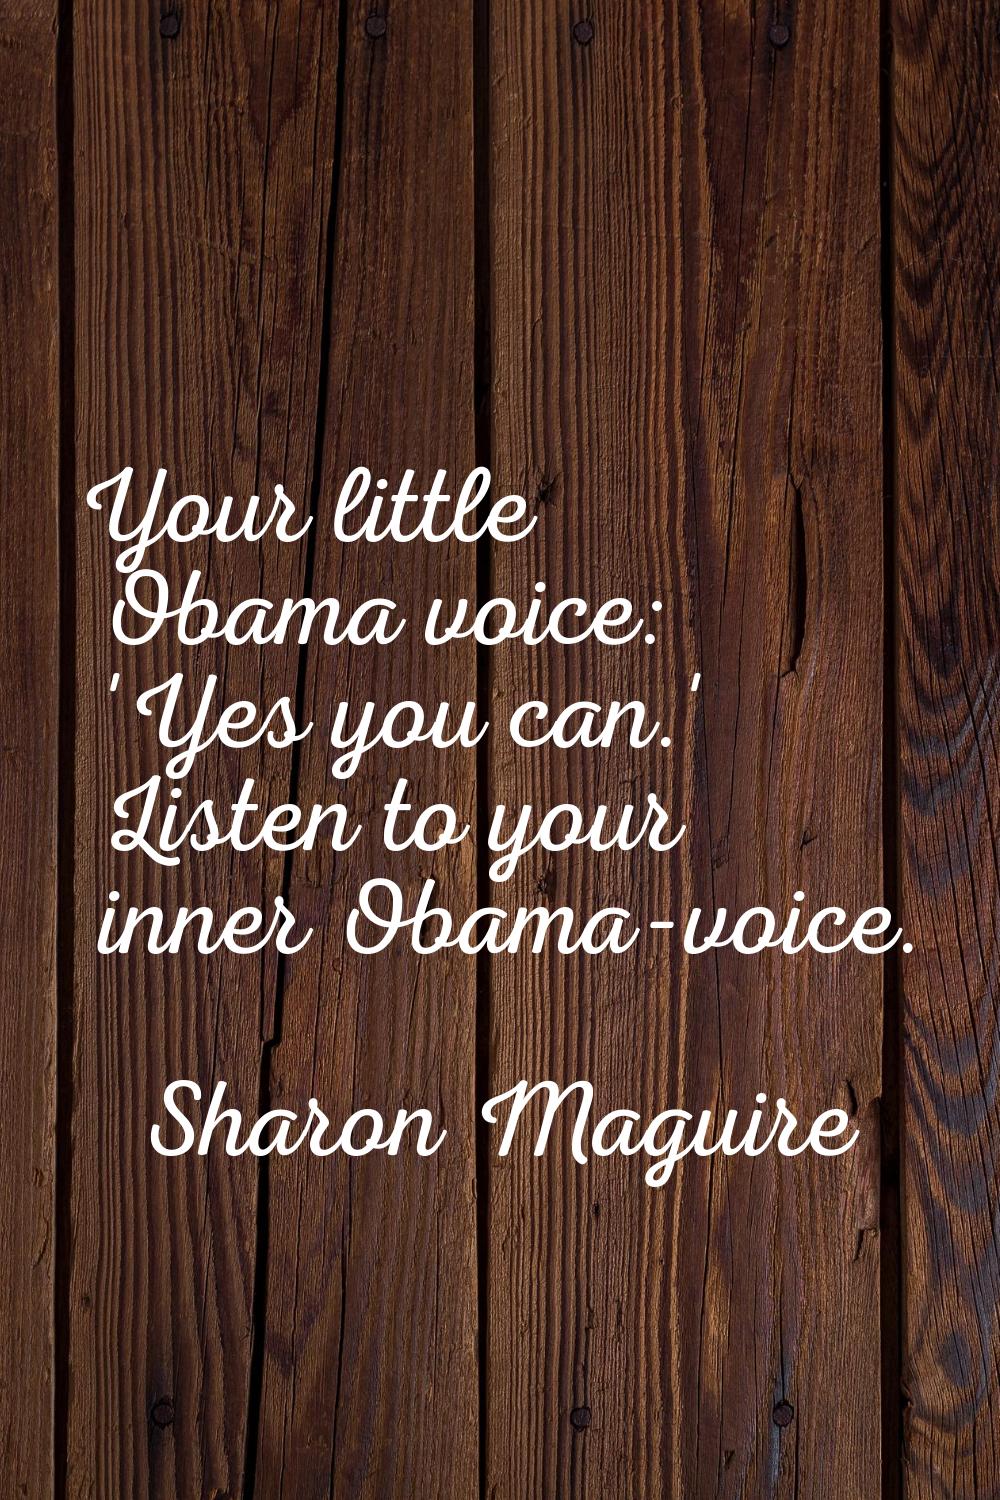 Your little Obama voice: 'Yes you can.' Listen to your inner Obama-voice.